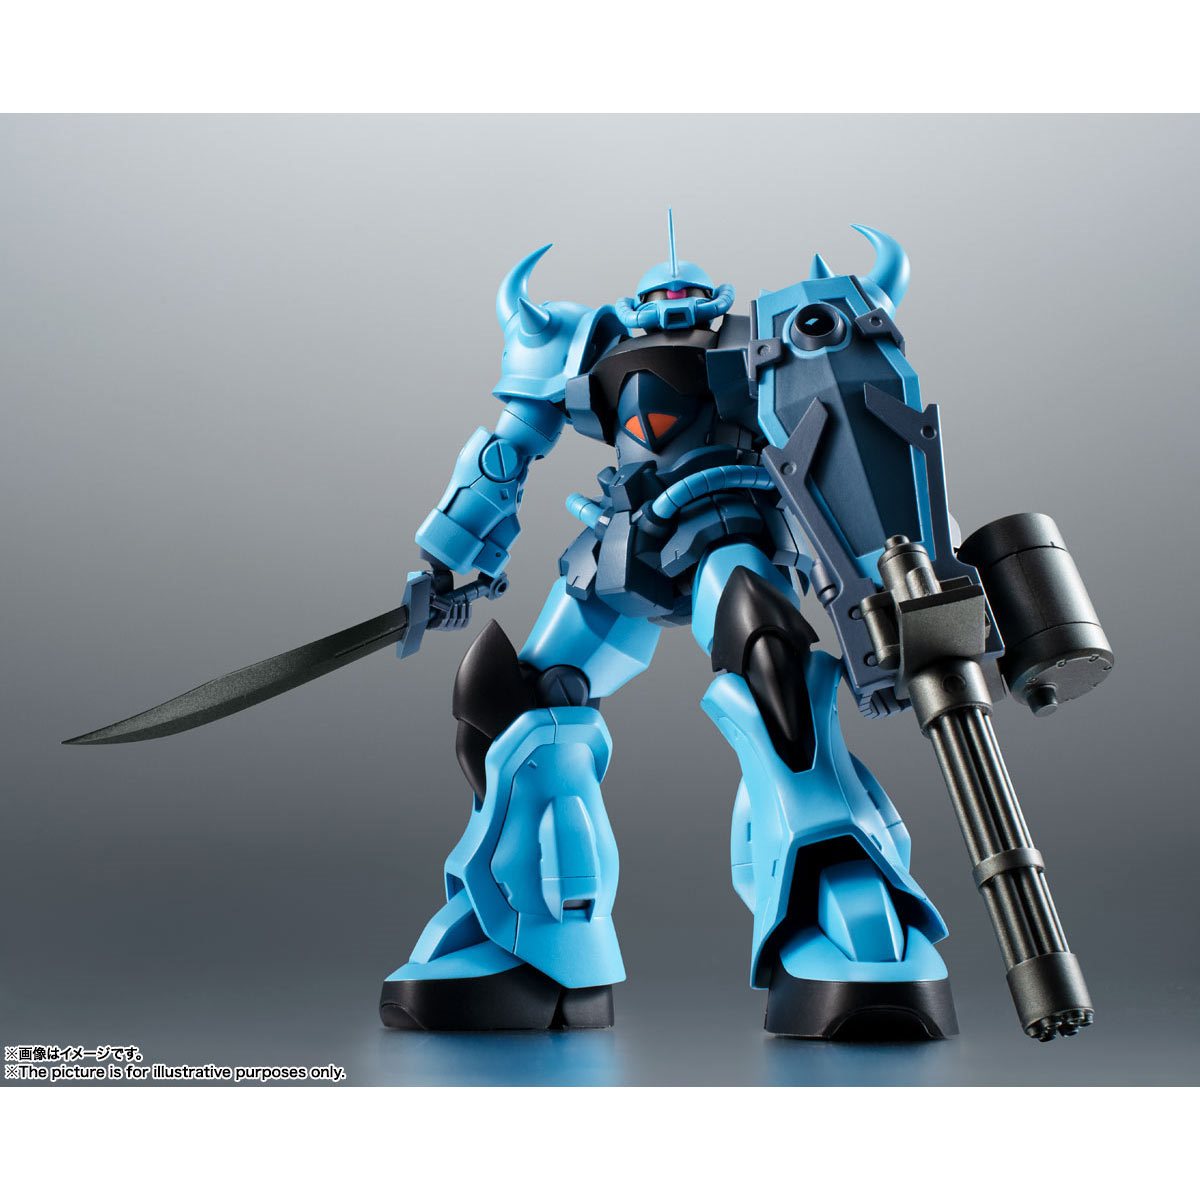 Bandai MSIA The 08 MS Teeam Ms-07b-3 Gouf Custom Action Figure a for sale online